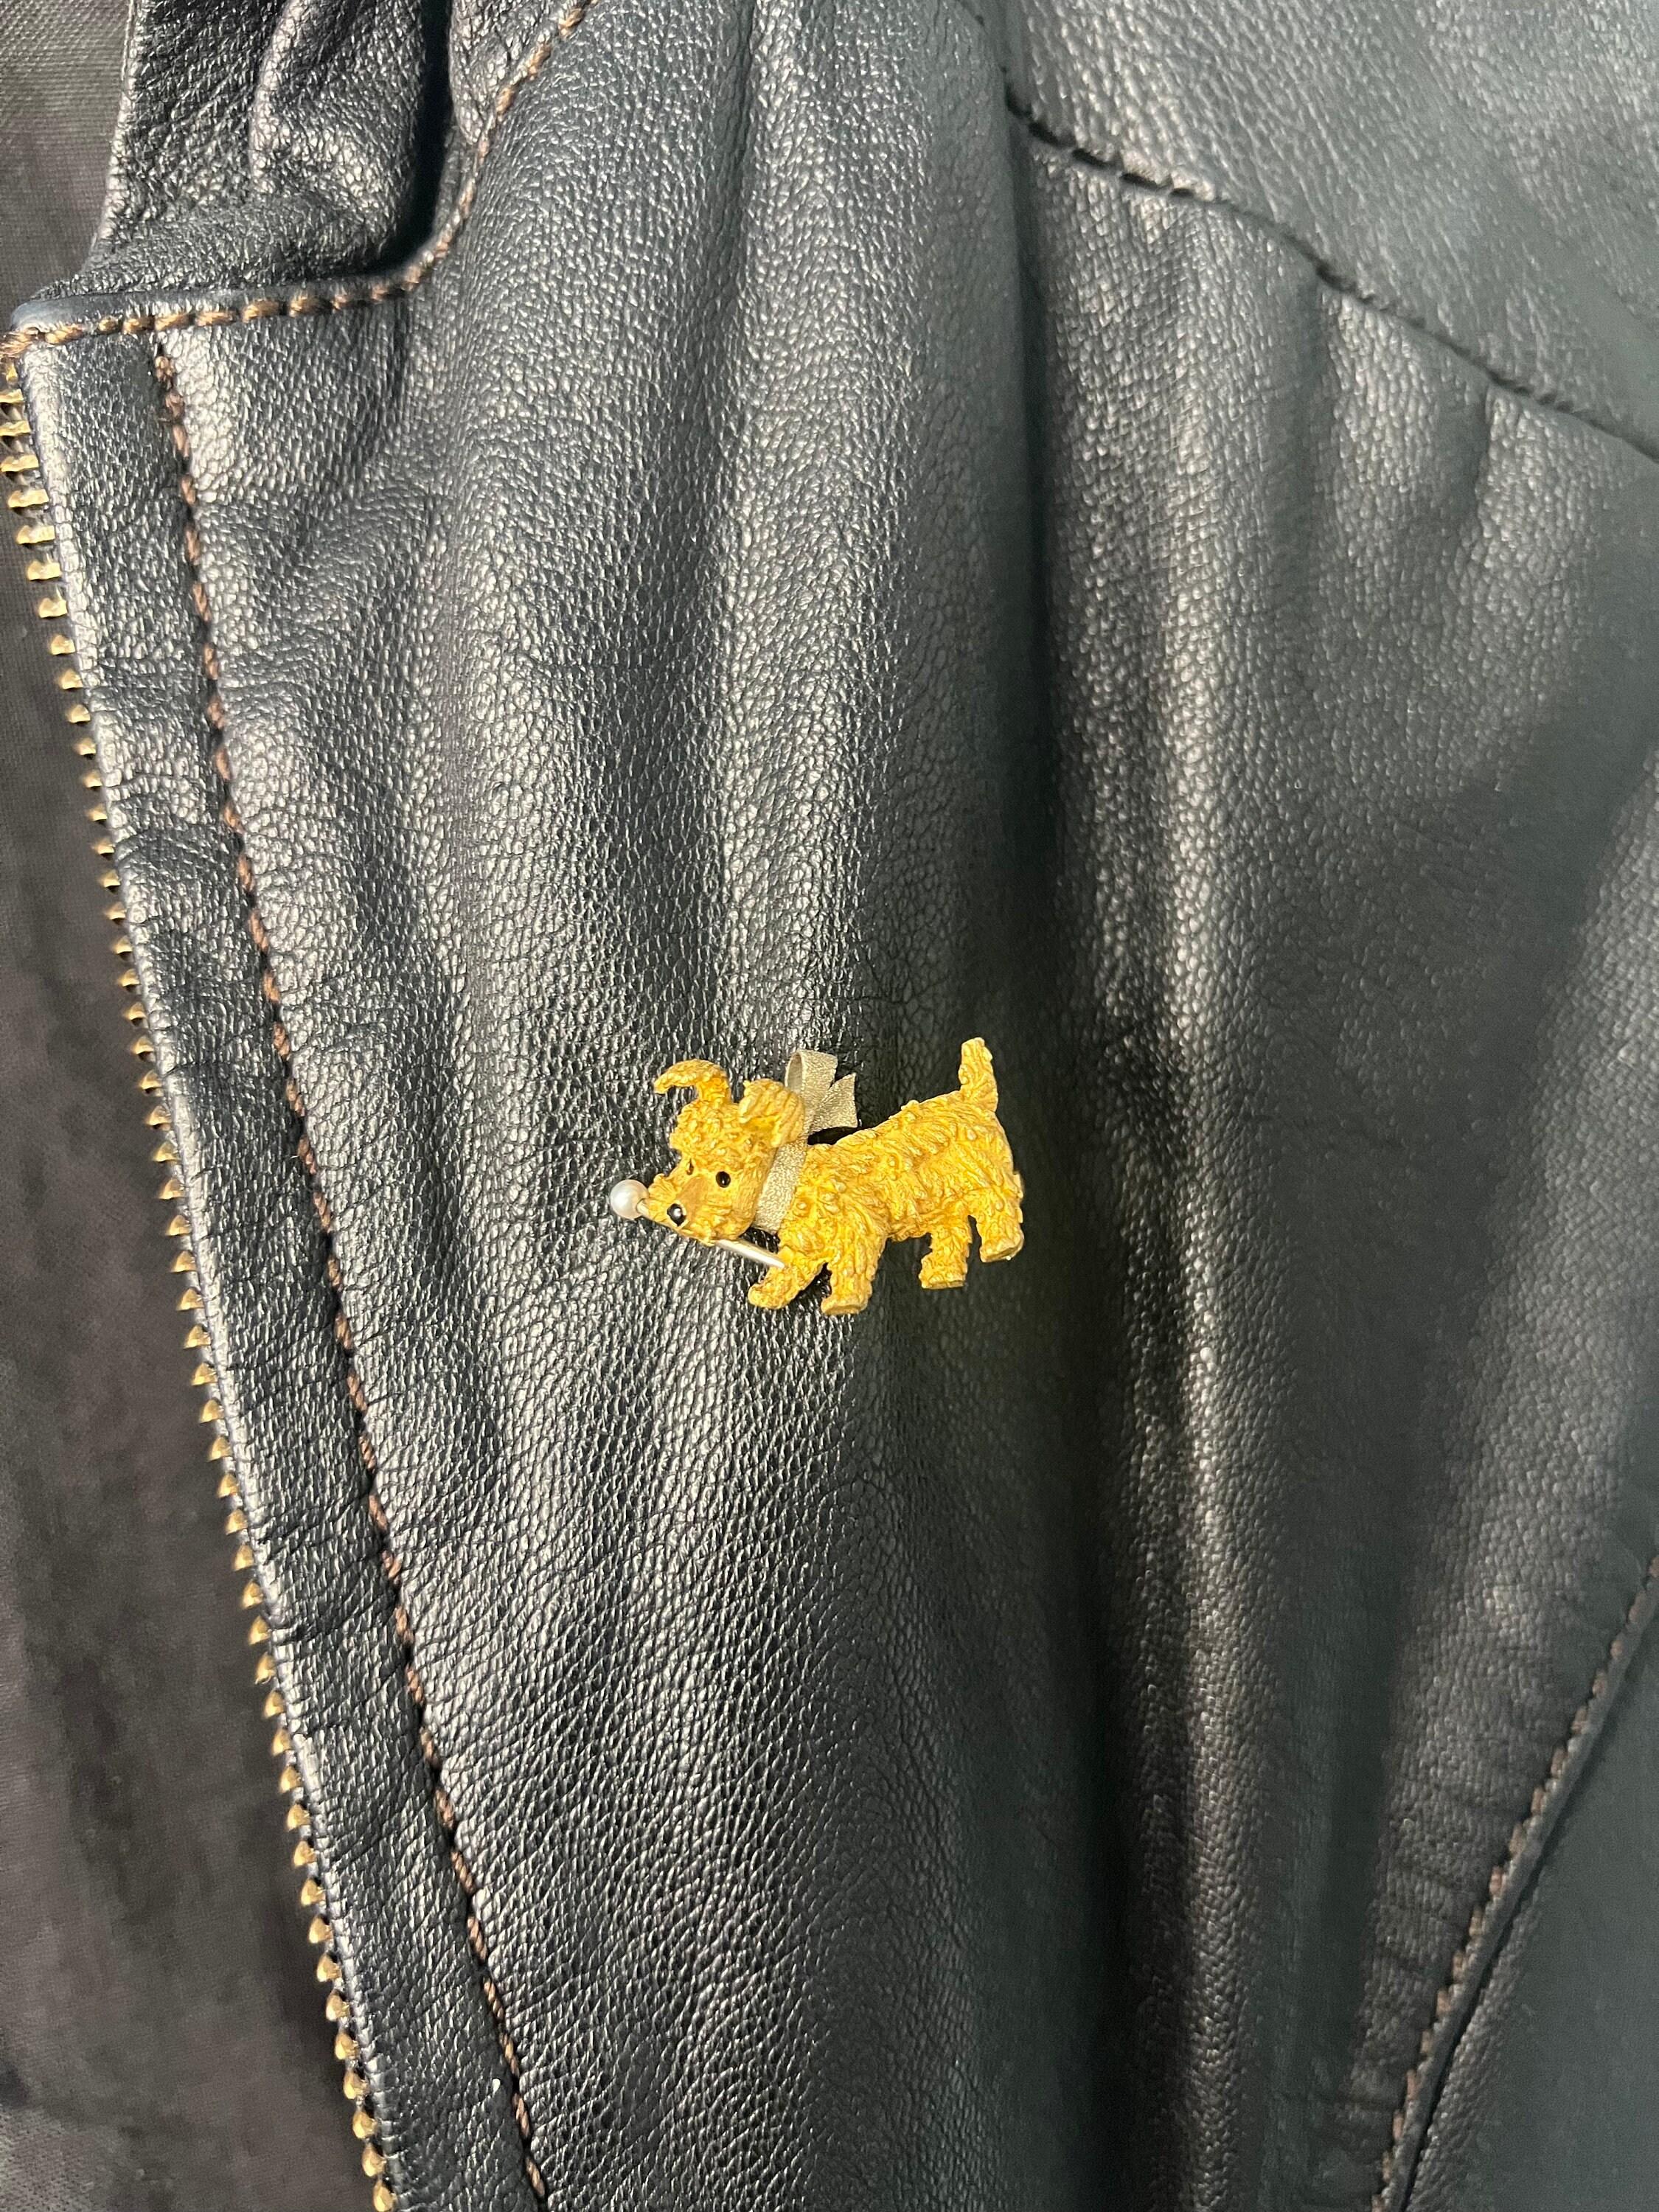 Vintage Dog Brooch

18ct Gold Stamped- 750 Industria Argentina 

Circa 1950’s 

Cute, yellow gold vintage dog brooch. He looks like a lovely little Schnauzer or similar breed. 
Beautifully detailed with a little onyx set nose, a white gold collar &